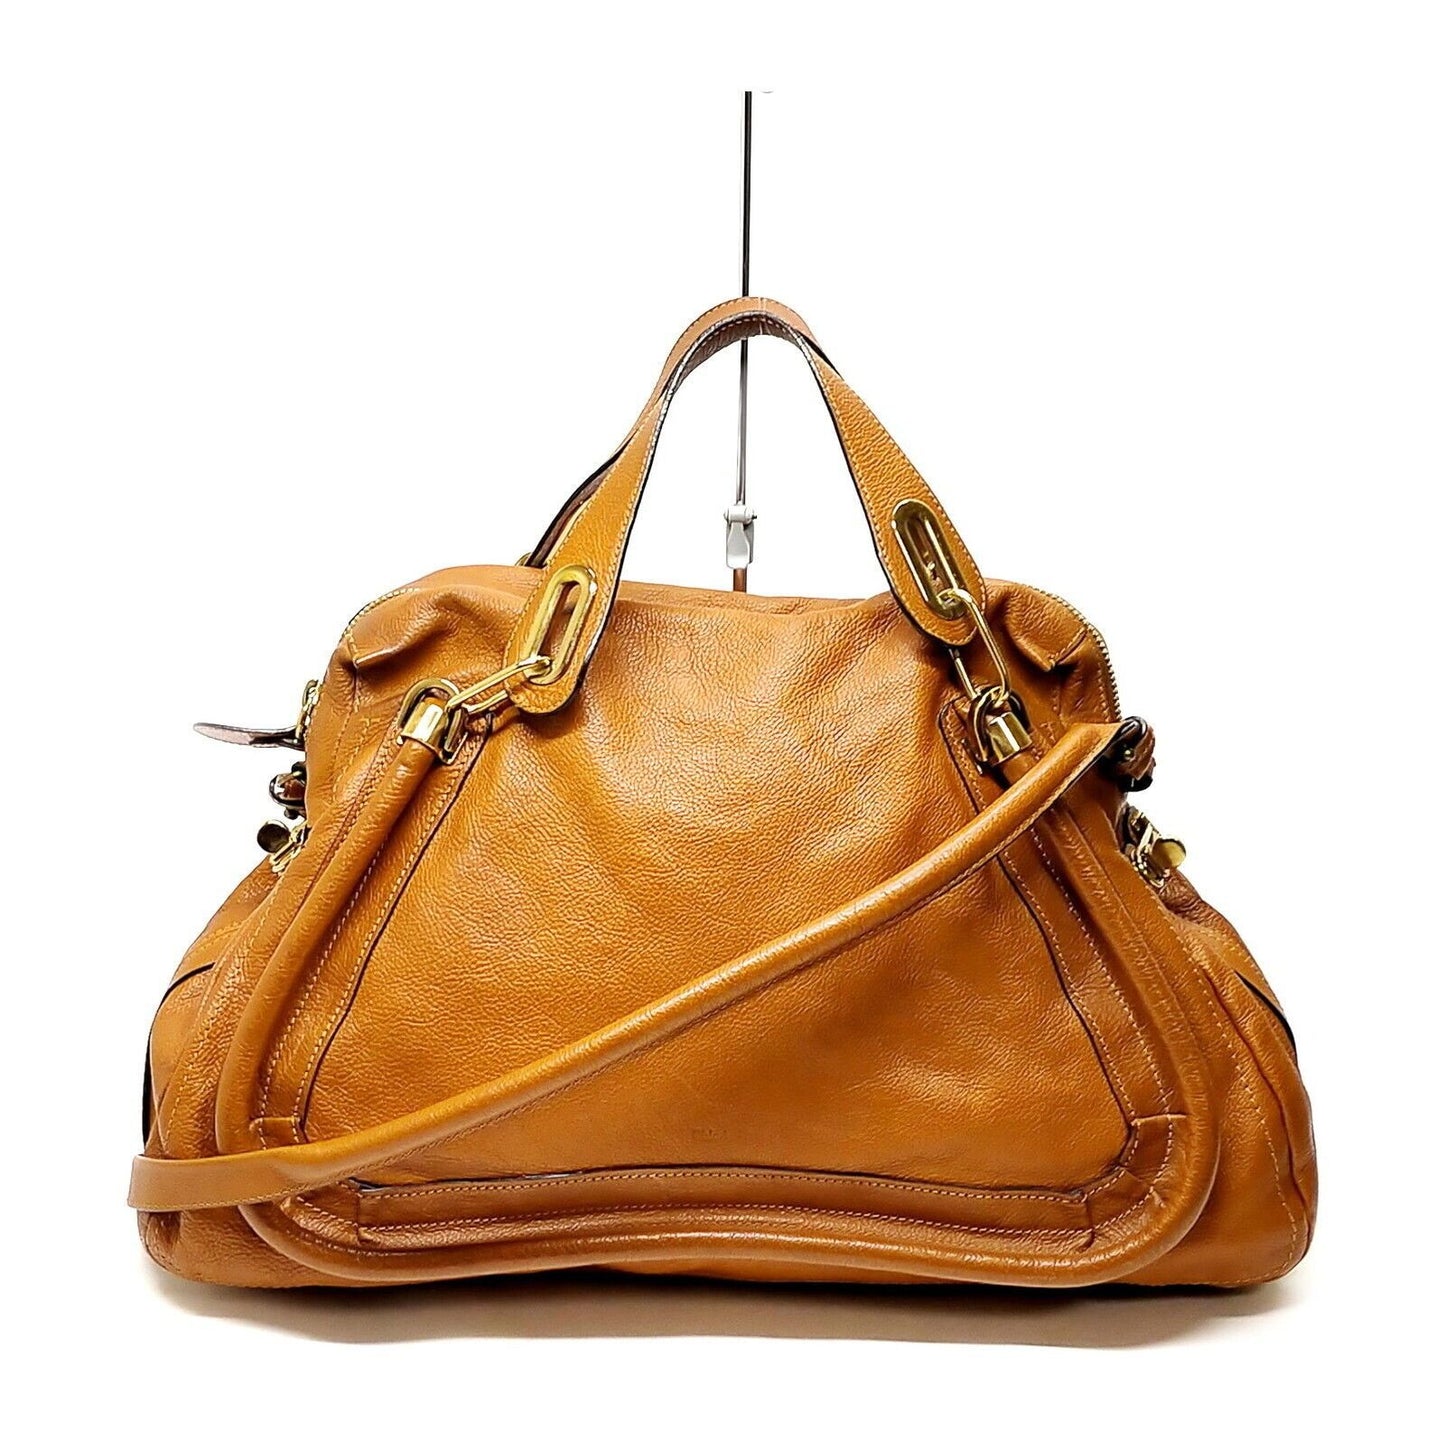 Chloé 'Paraty' style camel leather top zip two-way bag